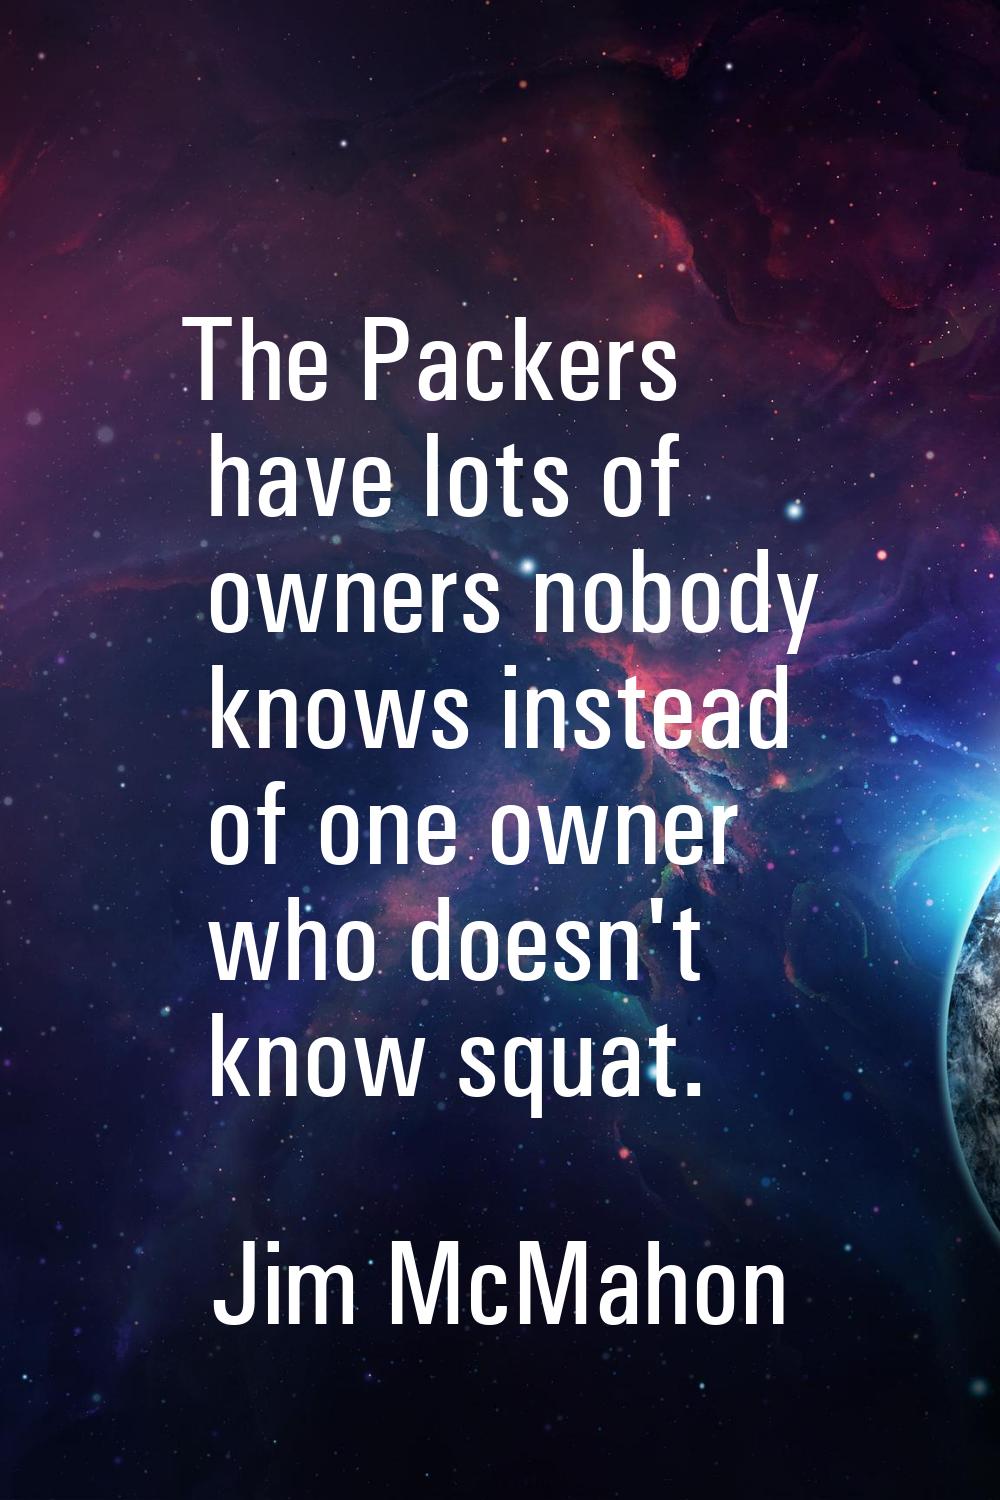 The Packers have lots of owners nobody knows instead of one owner who doesn't know squat.